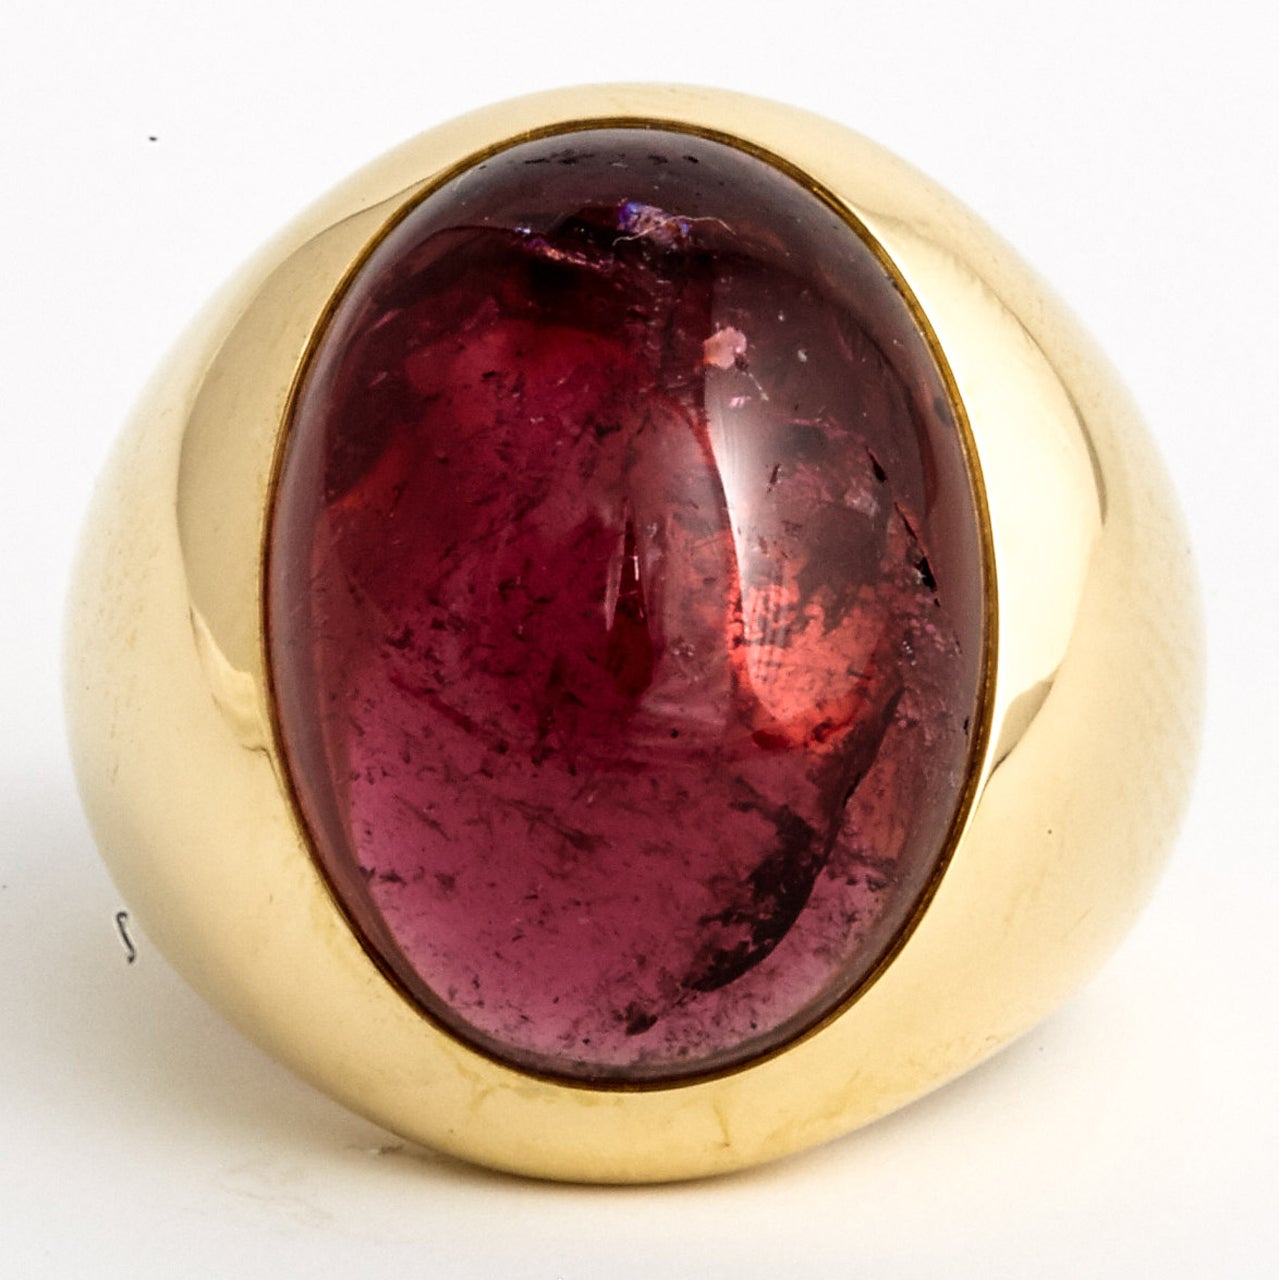 An 18 ct golden Narciso cocktail ring by Pomellato, centering a deep pinkish red oval shaped cabochon cut Rubelite. (the name given to reddish-pink tourmaline).Signed by the maker and hallmarked. Ring size 53 ½.

All of our prices exclude VAT.